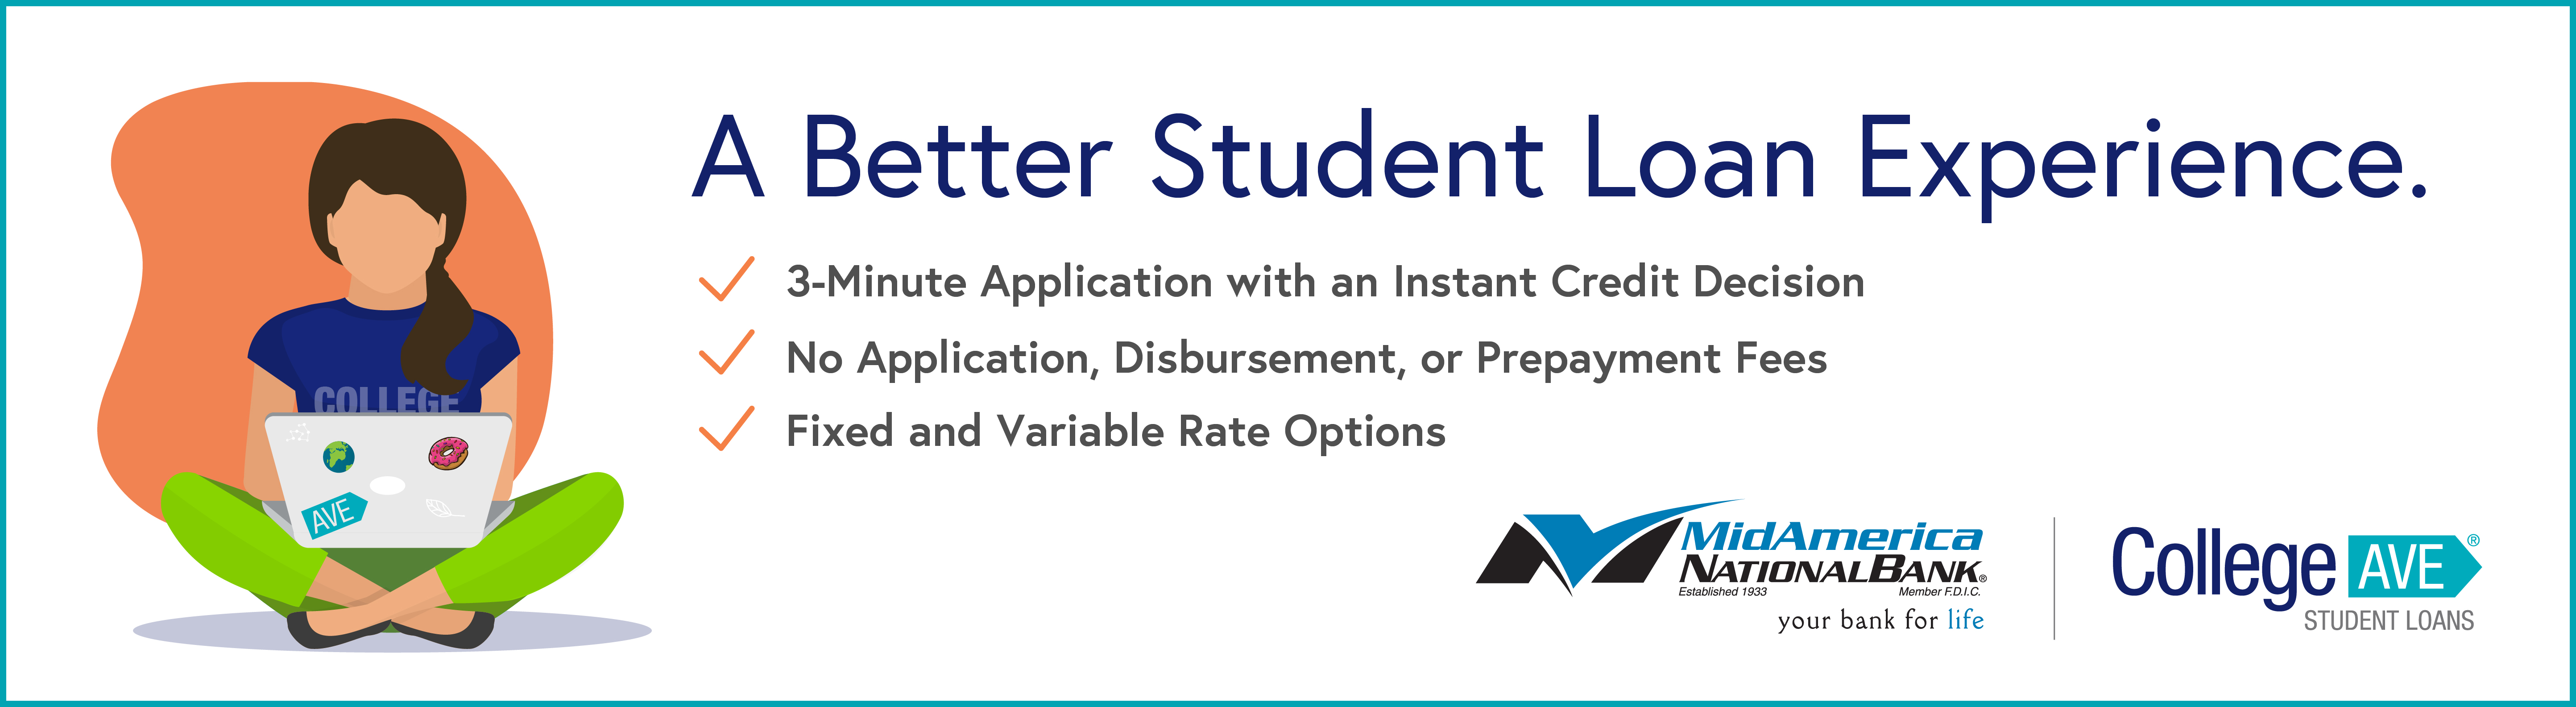 A Better Student Loan Experience. - 3-Minute application with an instant credit decision. No application, disbursement or prepayment fees. Fixed and variable rate options.